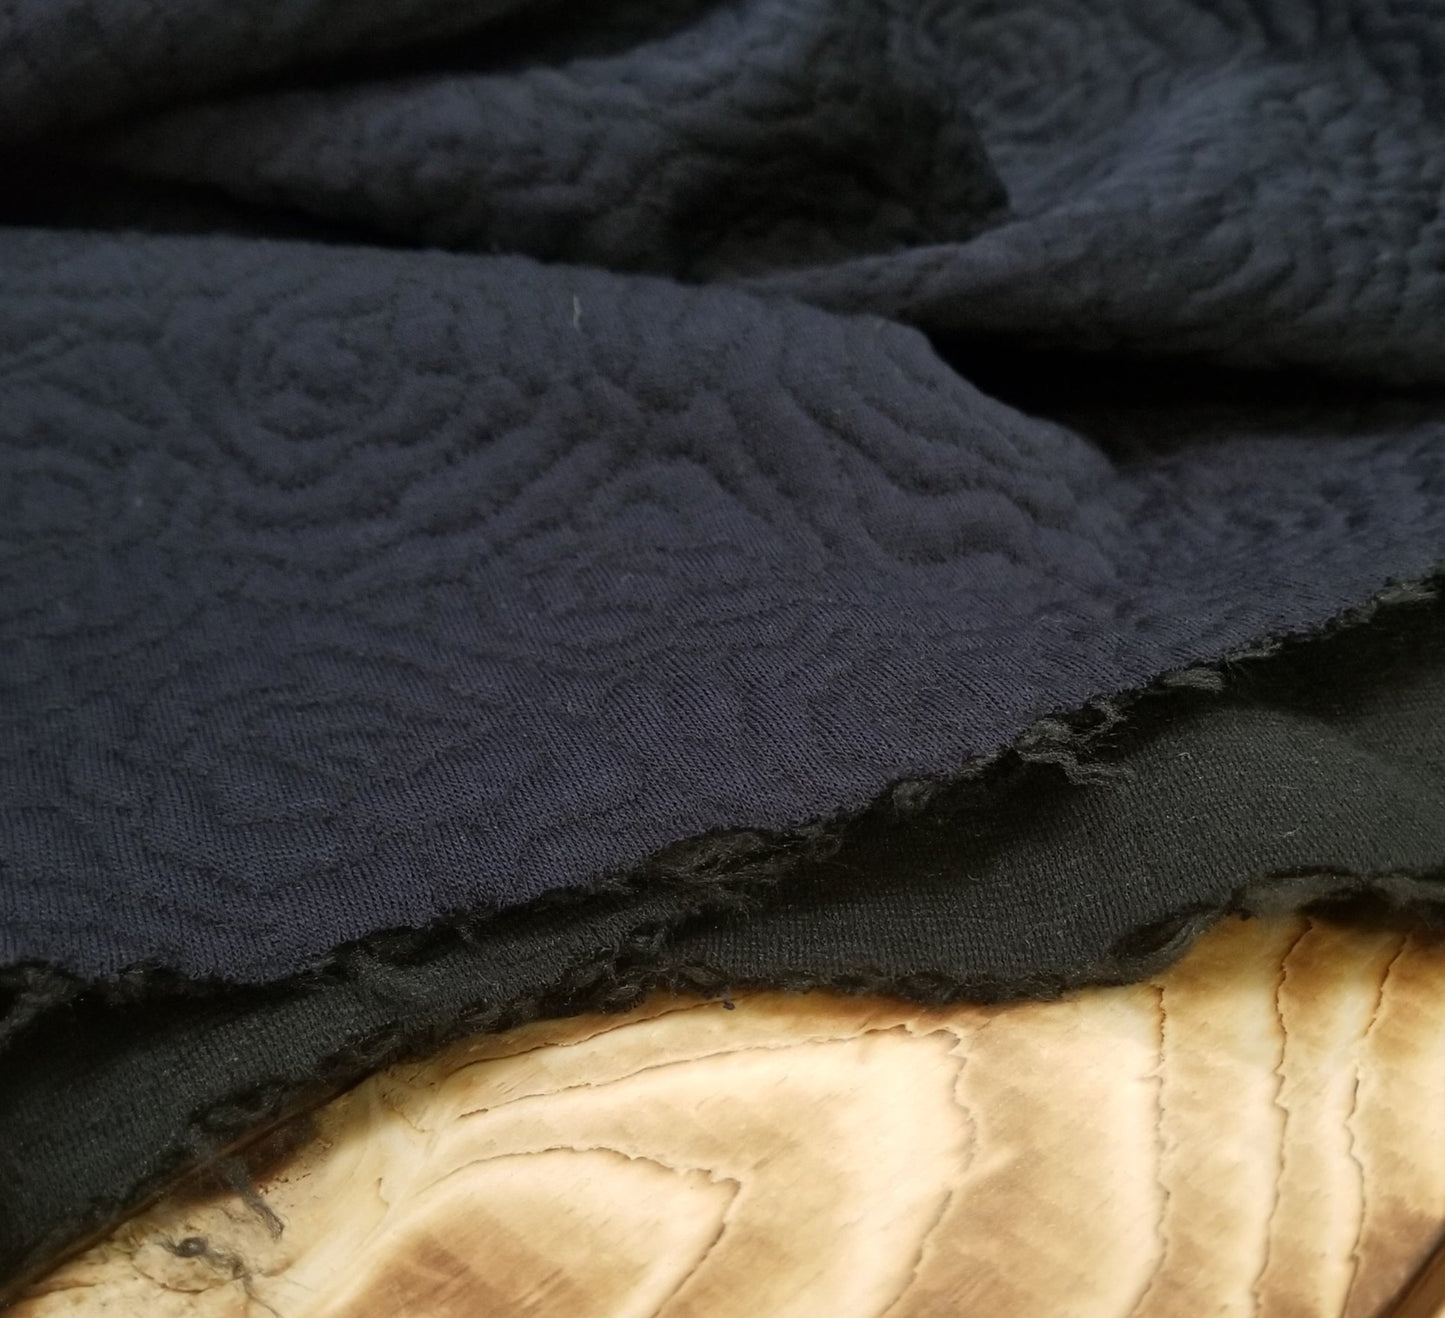 Designer Deadstock Rose Embroidered Dark Navy and Black Quilted Wool Blend Knit-Priced by the yard